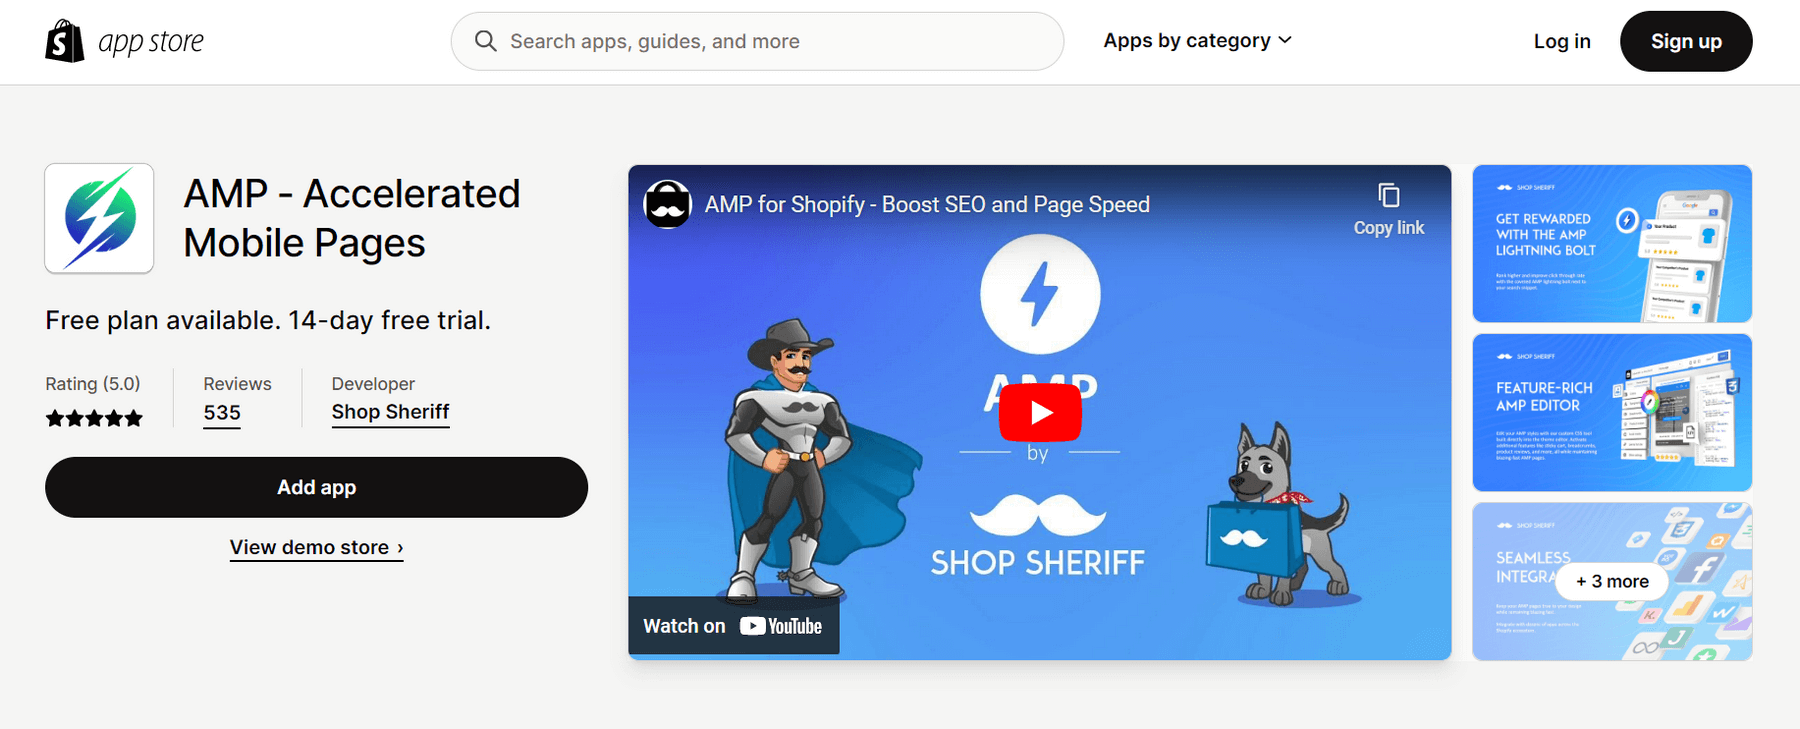 seo apps for shopify - AMP ‑ Accelerated Mobile Pages